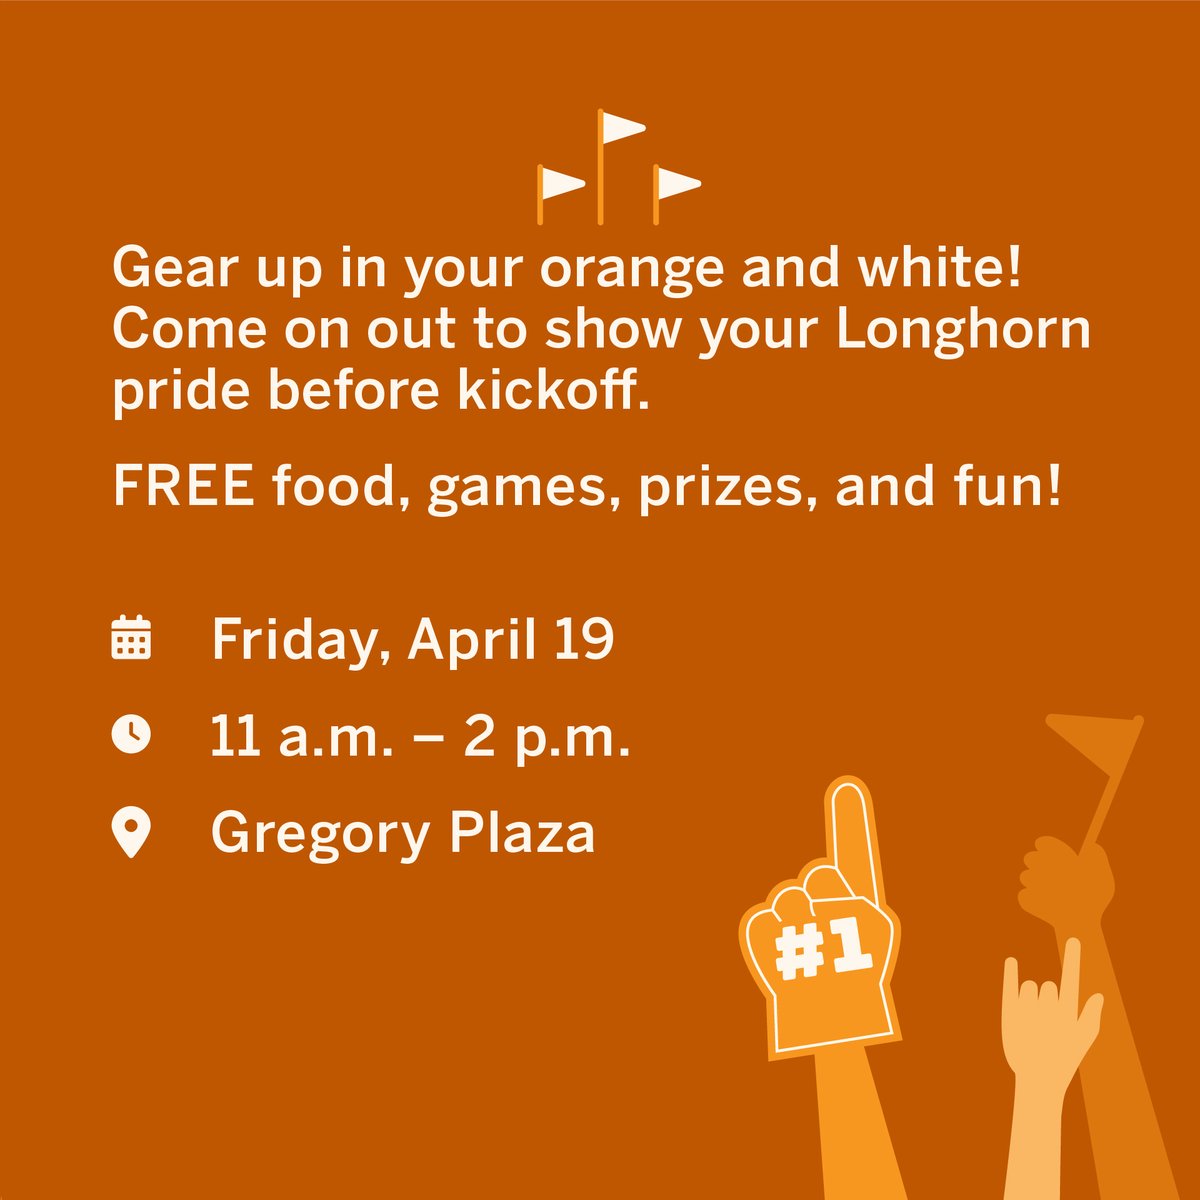 TODAY: Gear up in your orange and white, Longhorns! Join us for the Orange and White Carnival from 11 a.m. - 2 p.m. Make your way to Gregory Plaza to enjoy FREE food, games & prizes. Show your Longhorn pride as we get ready for the Orange-White spring football game tomorrow! 🏈🤘